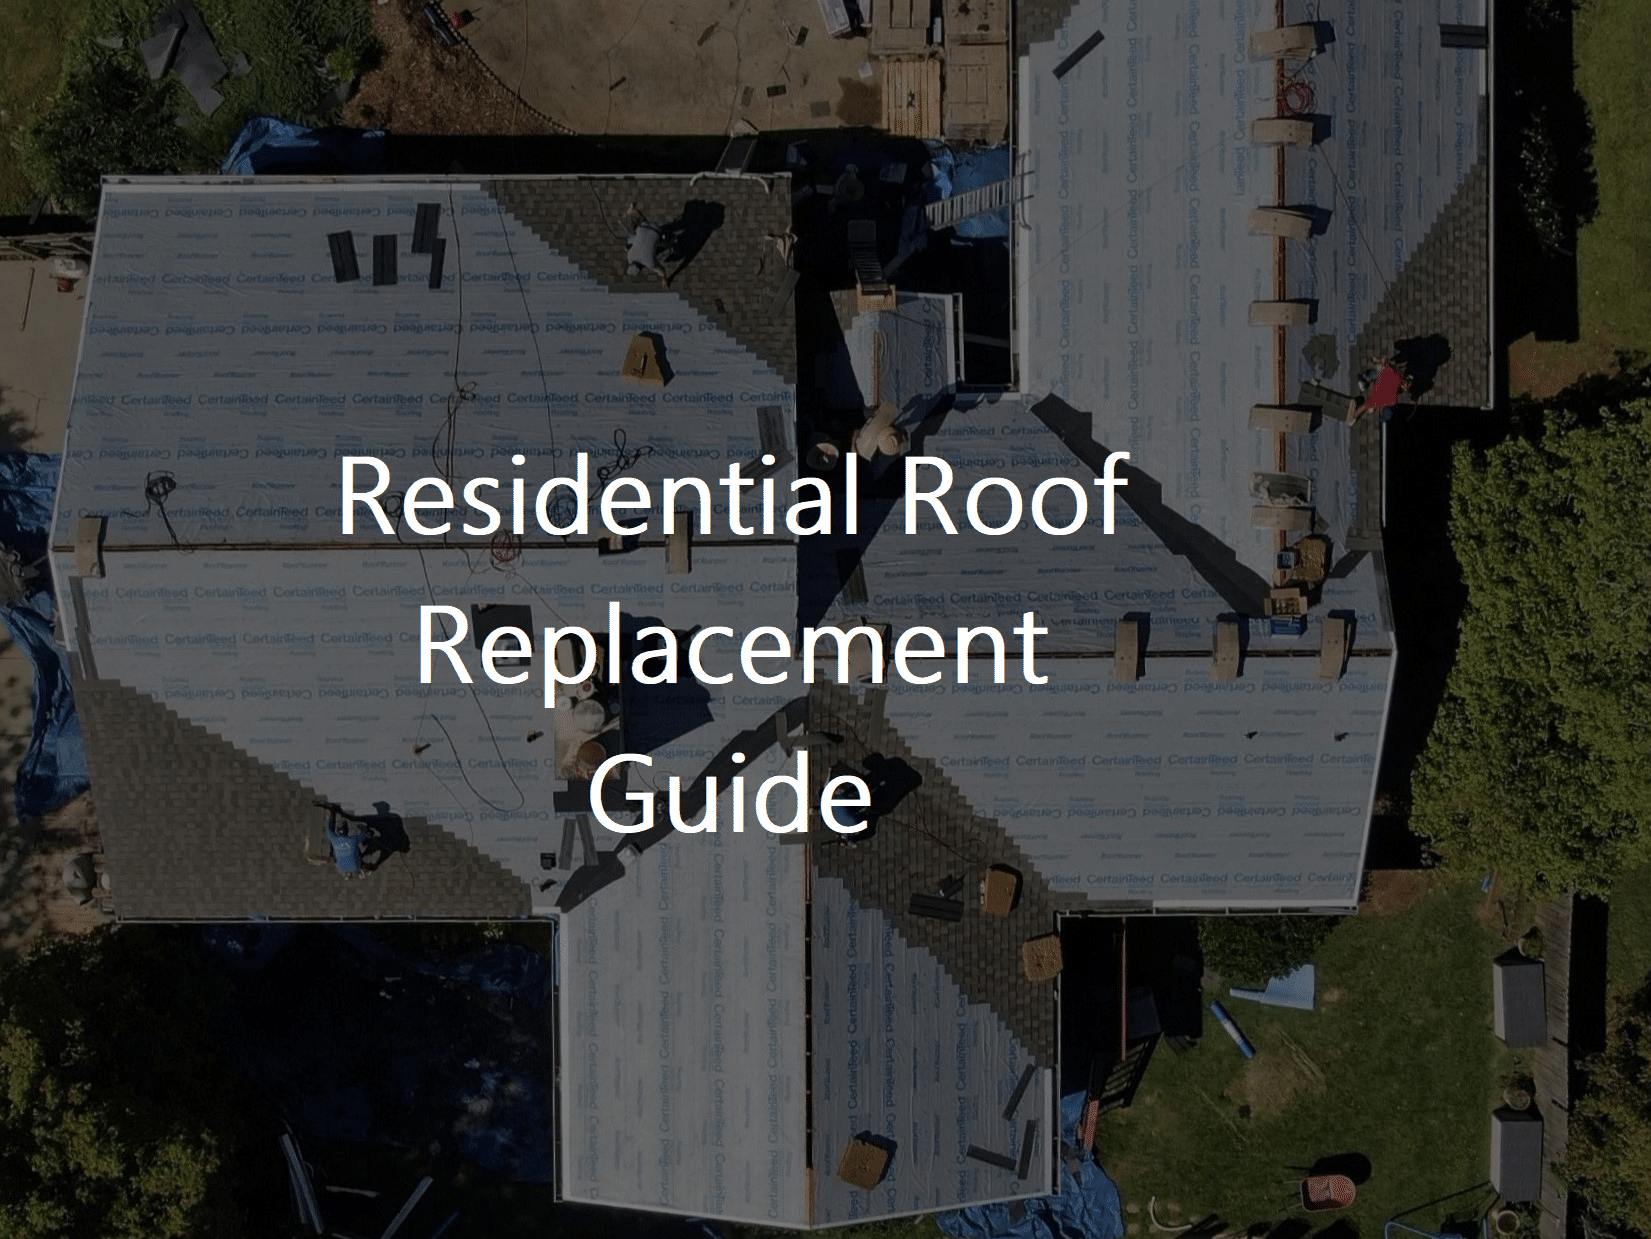 Residential Roof Replacement Guide2